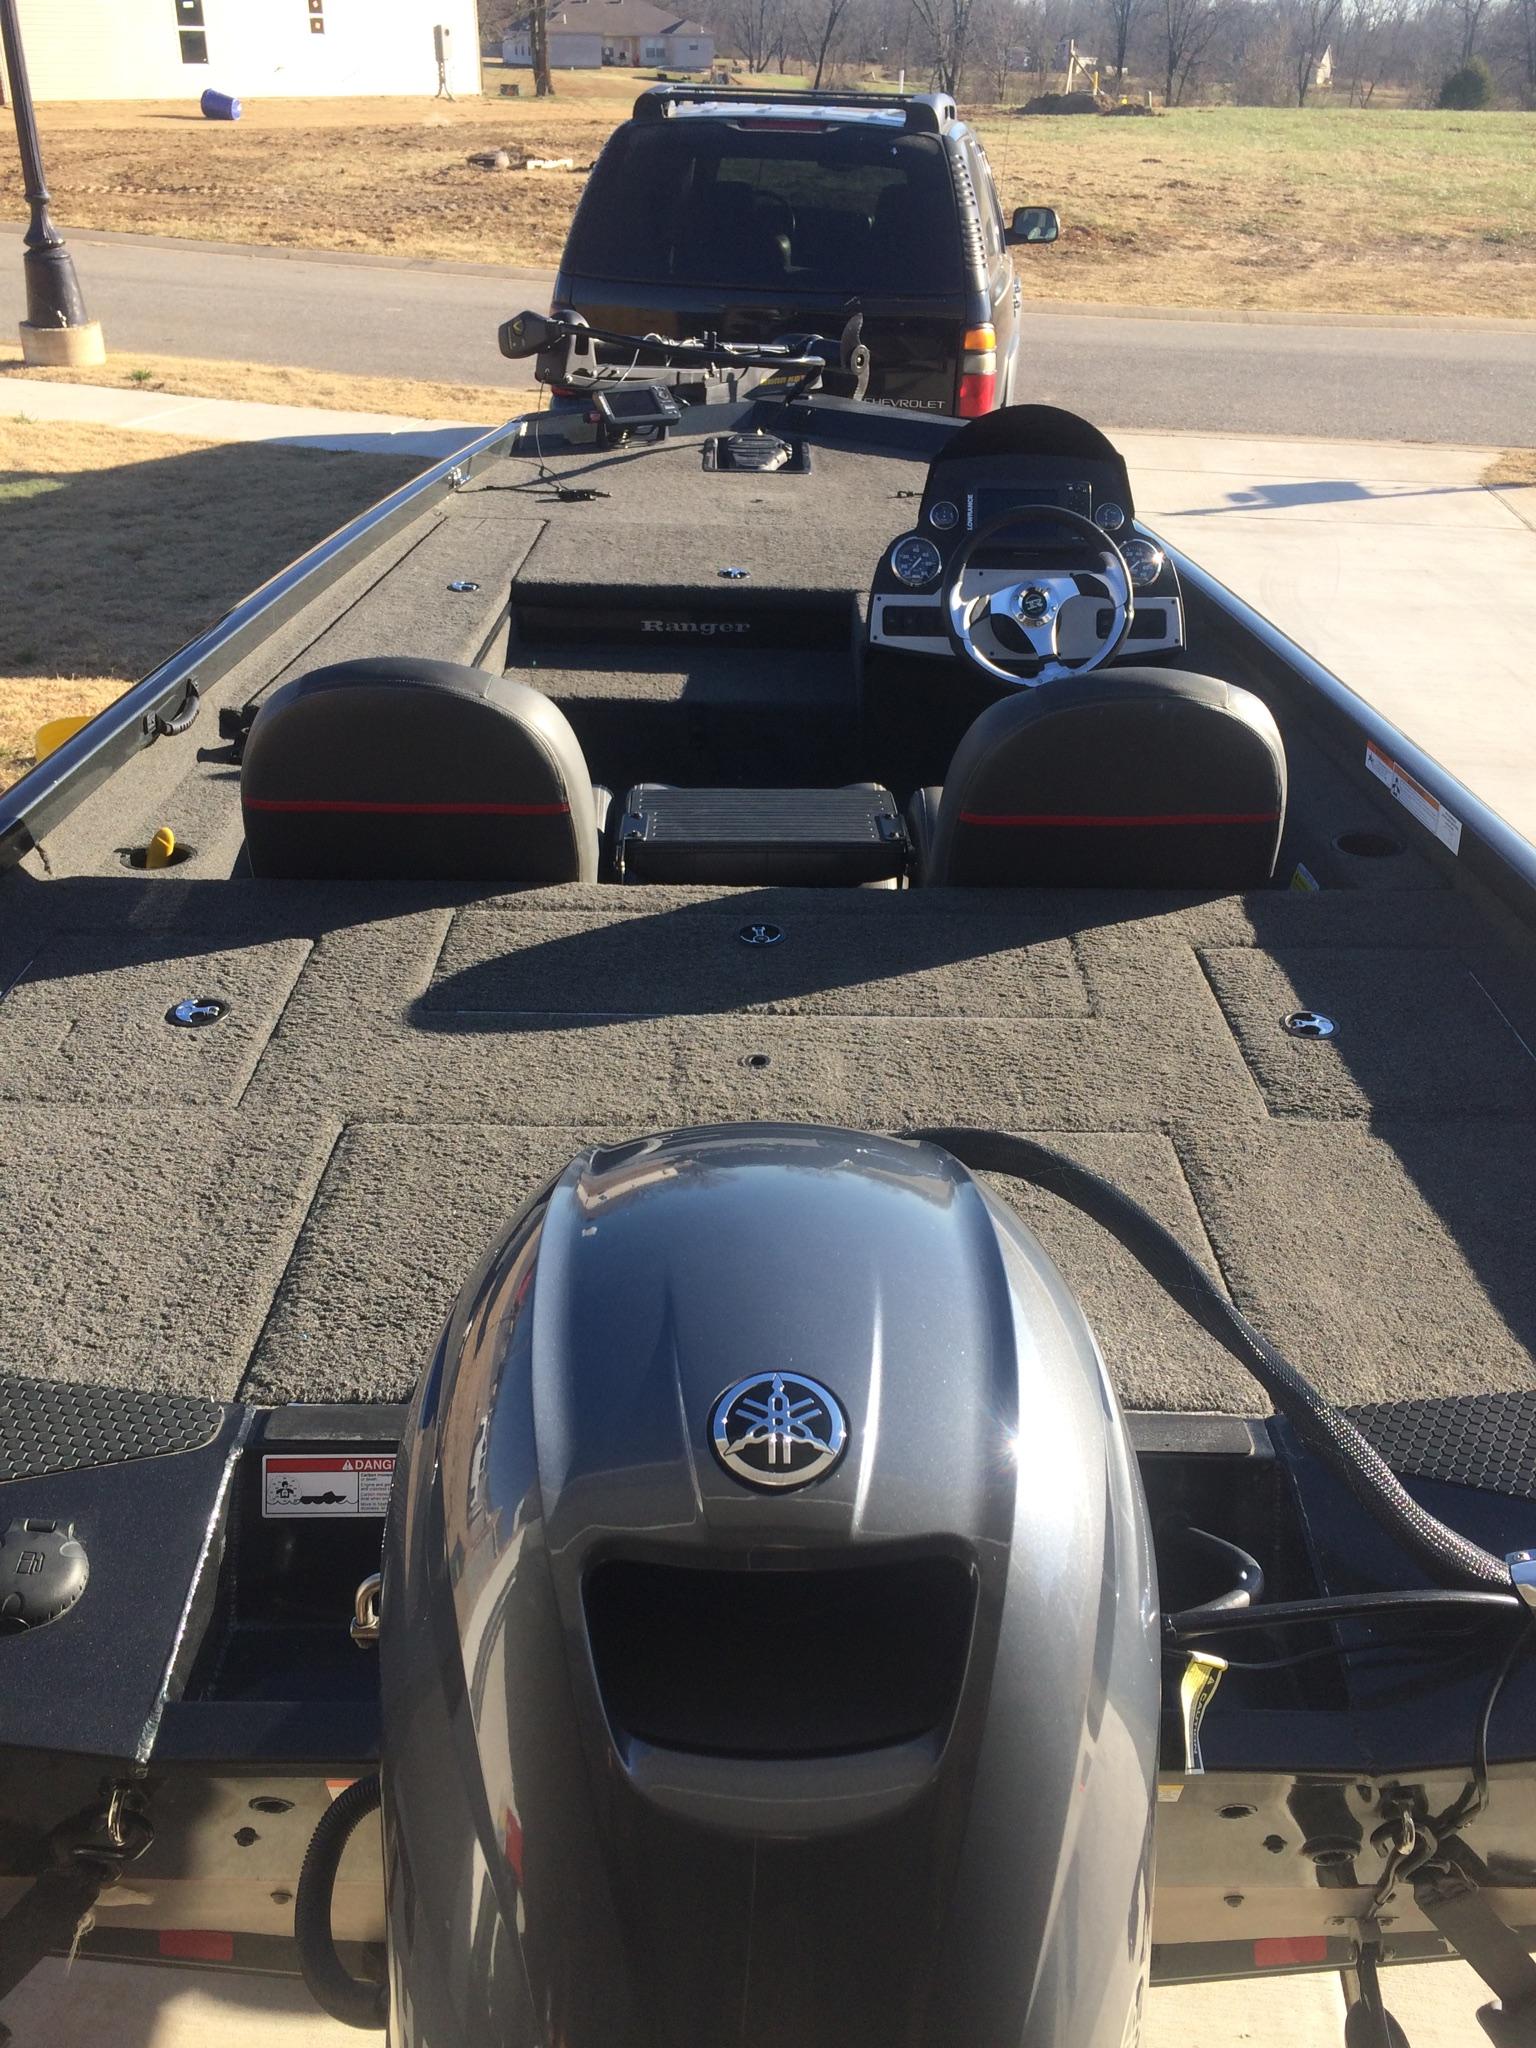 Super Clean Ranger 2014 RT178 w/ Yamaha 70 and extras ...